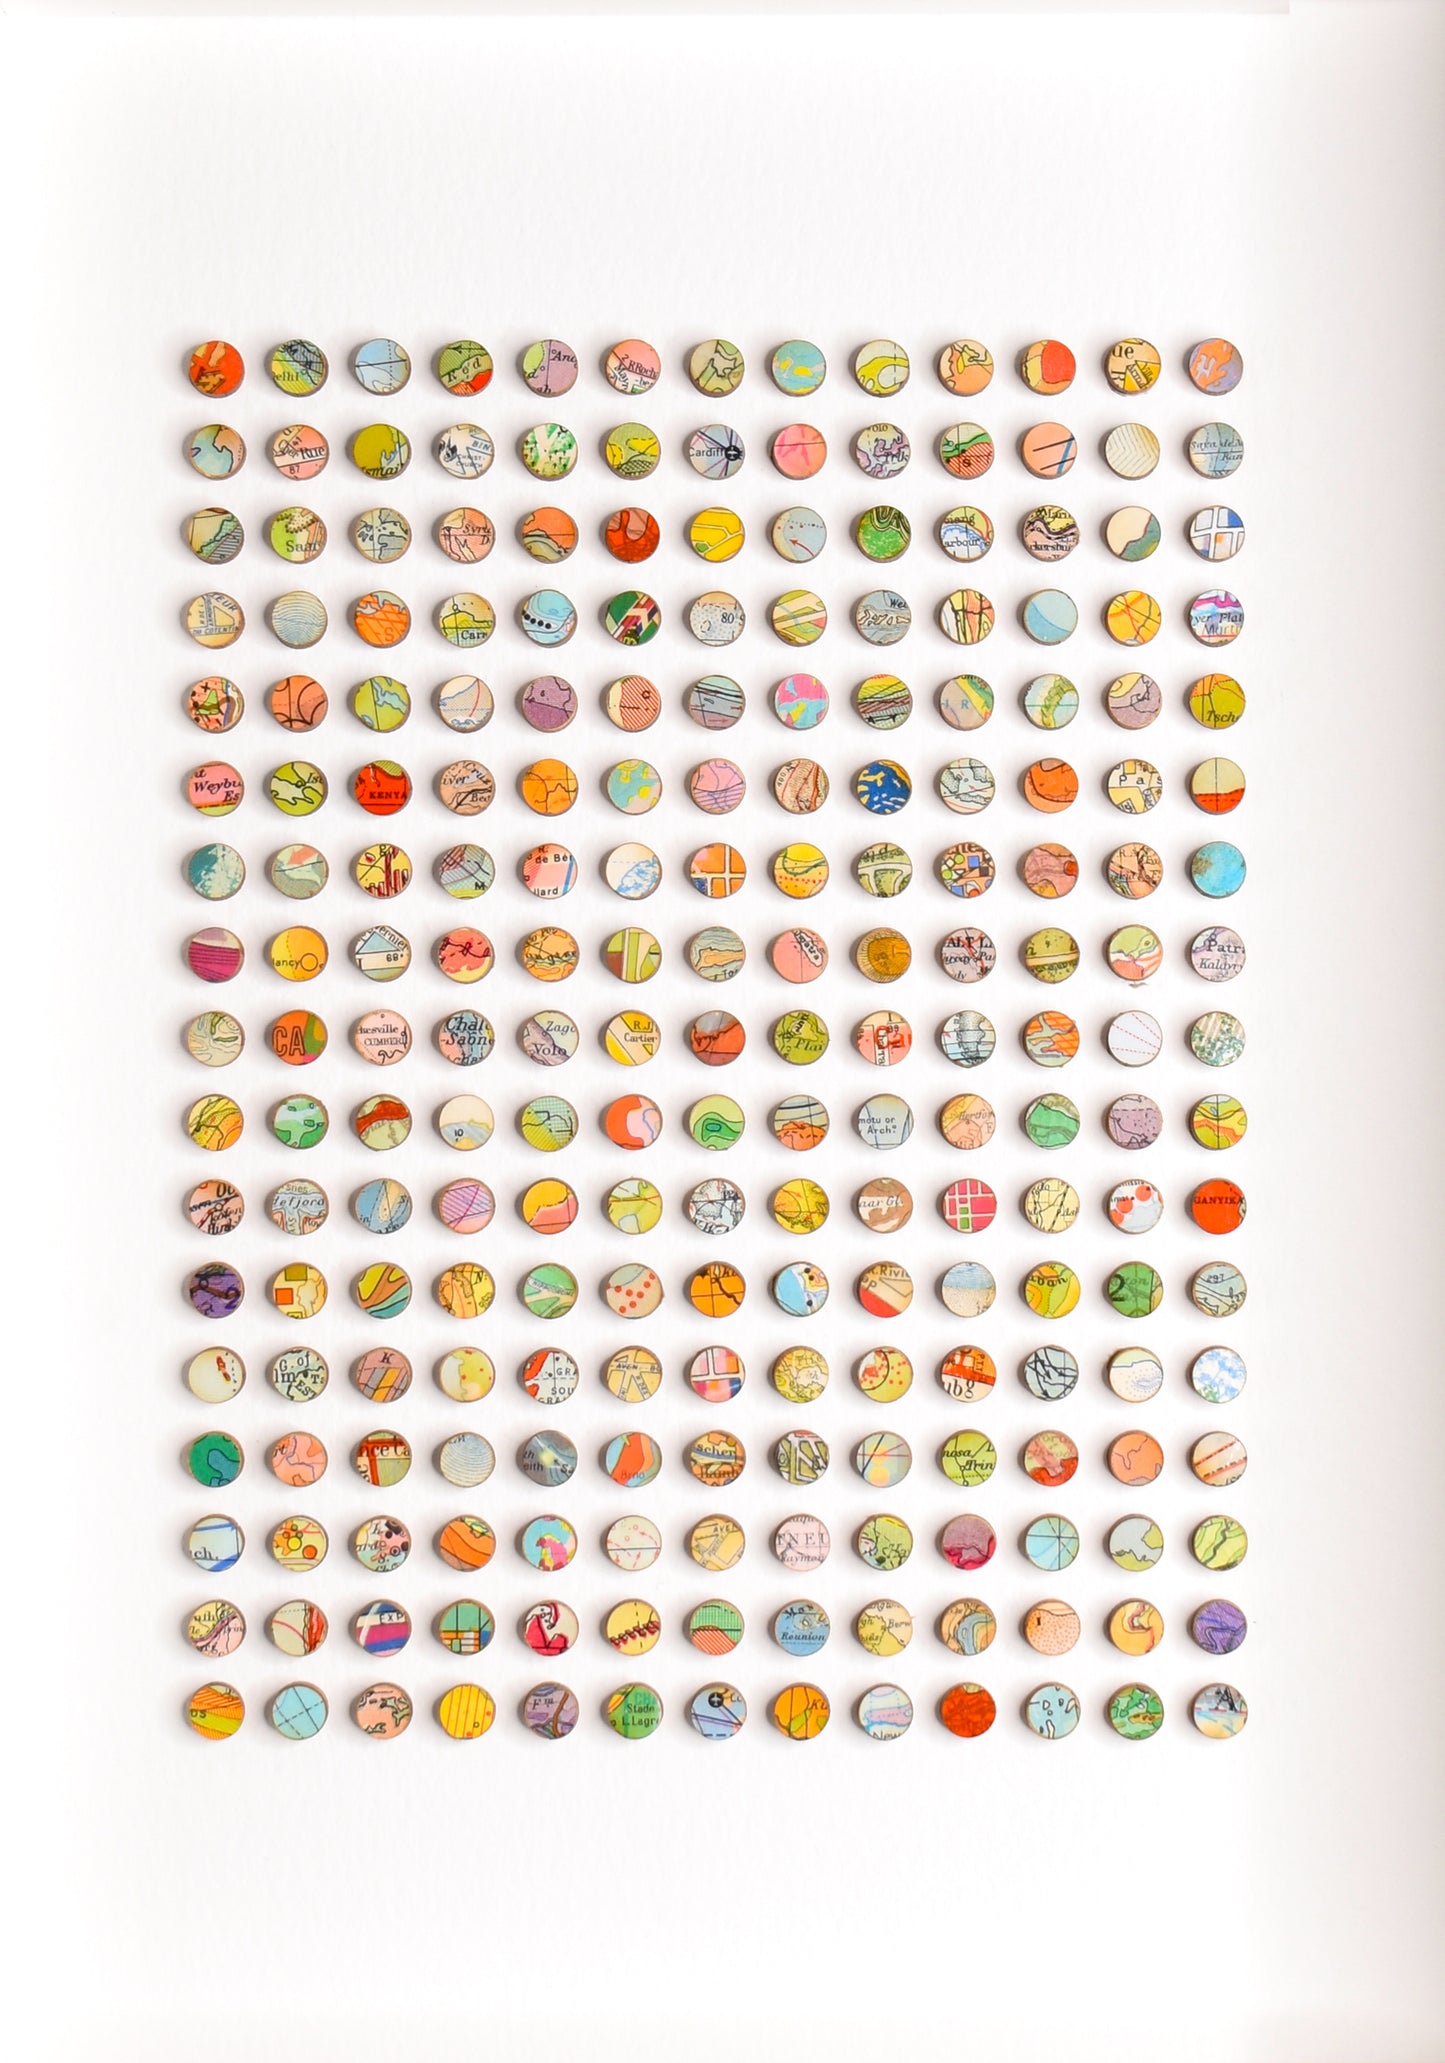 Two Hundred and Twenty One Miniature World Map Dots Collage